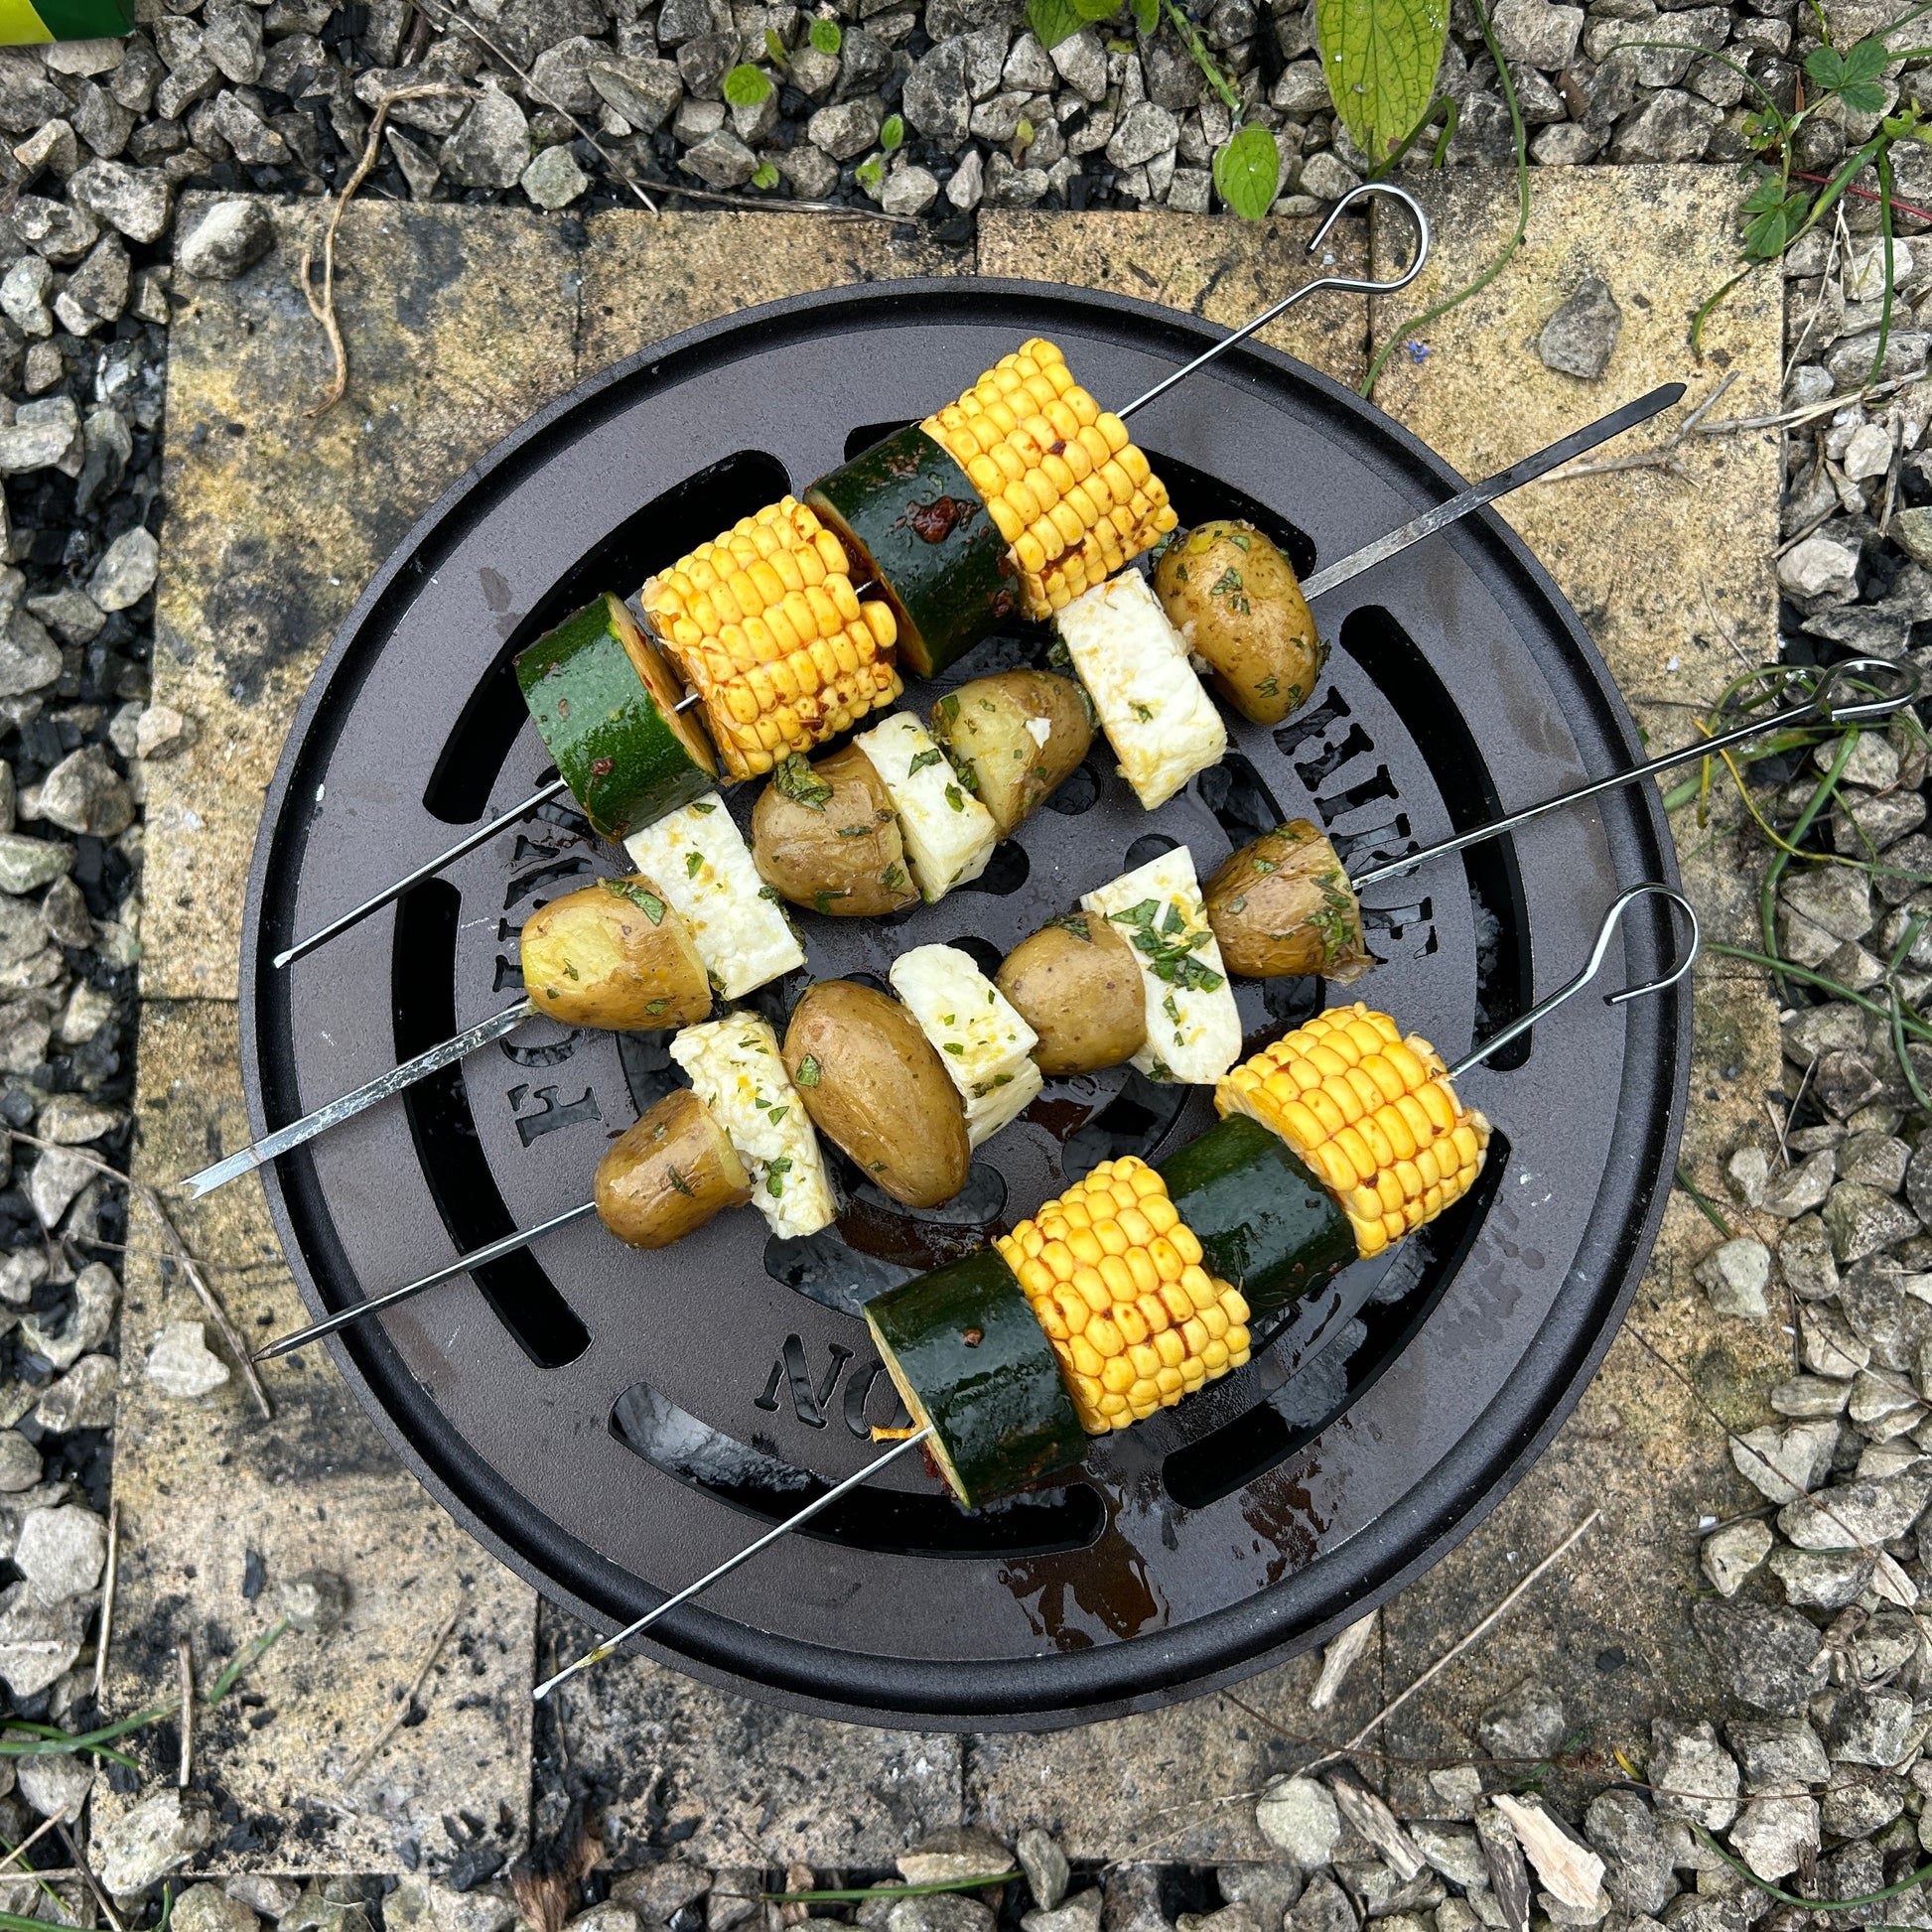 Netherton Foundry Outdoor Hob with grid